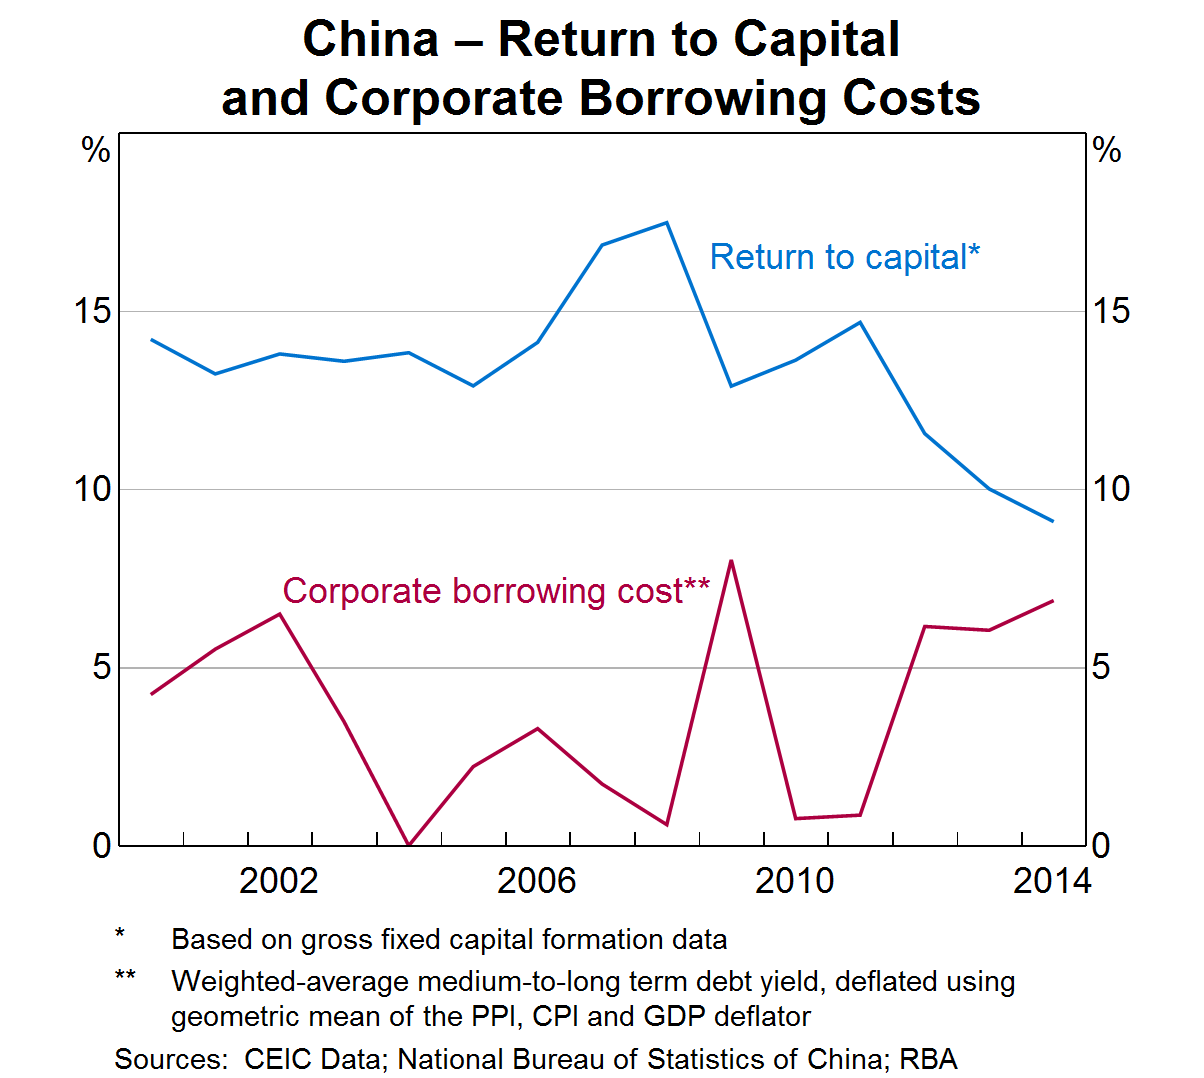 Graph 8: China – Return to Capital and Corporate Borrowing Costs